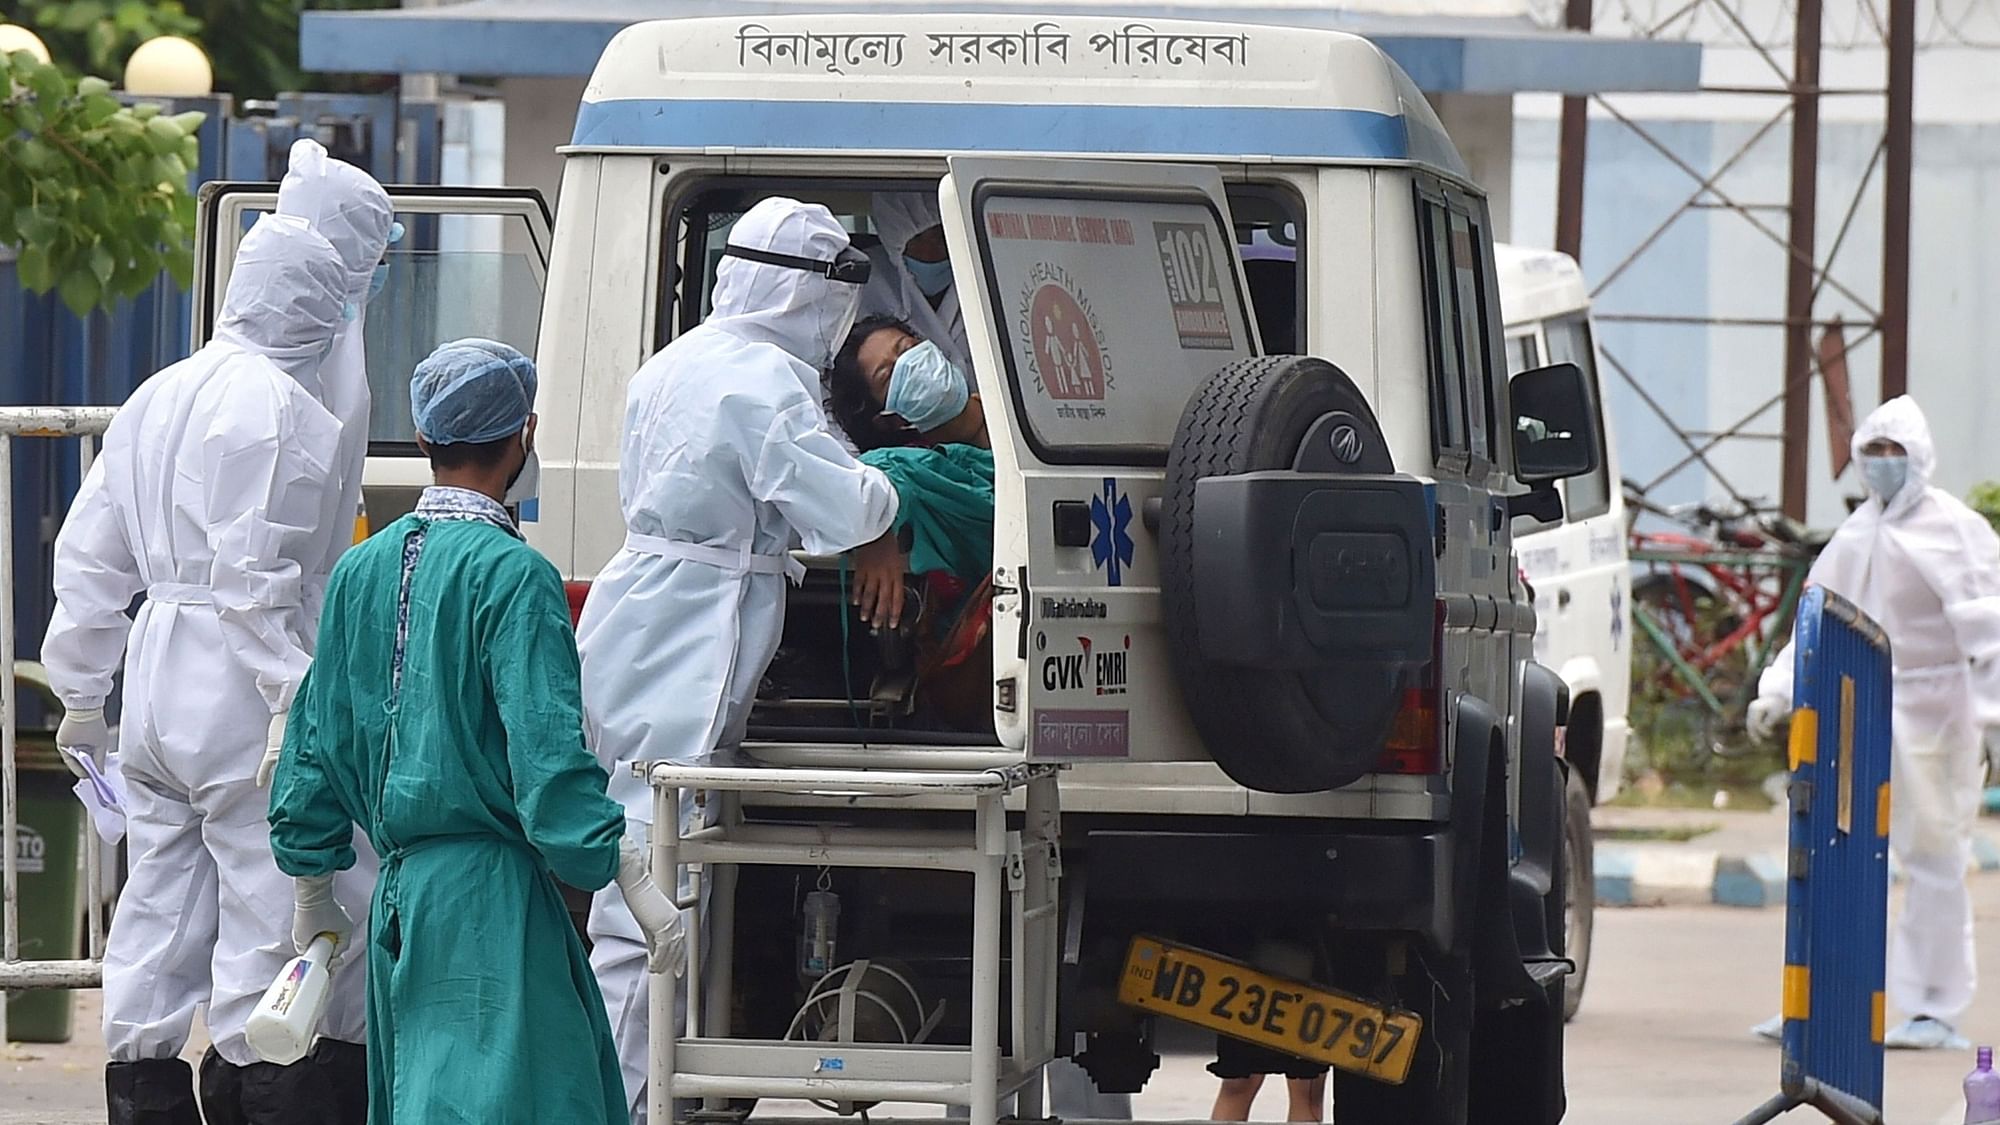 68-year-old Madhav Narayan Dutta couldn’t breathe and was taken to the Bongaon Subdivisional Hospital around 5 pm on Saturday. Image used for representation.